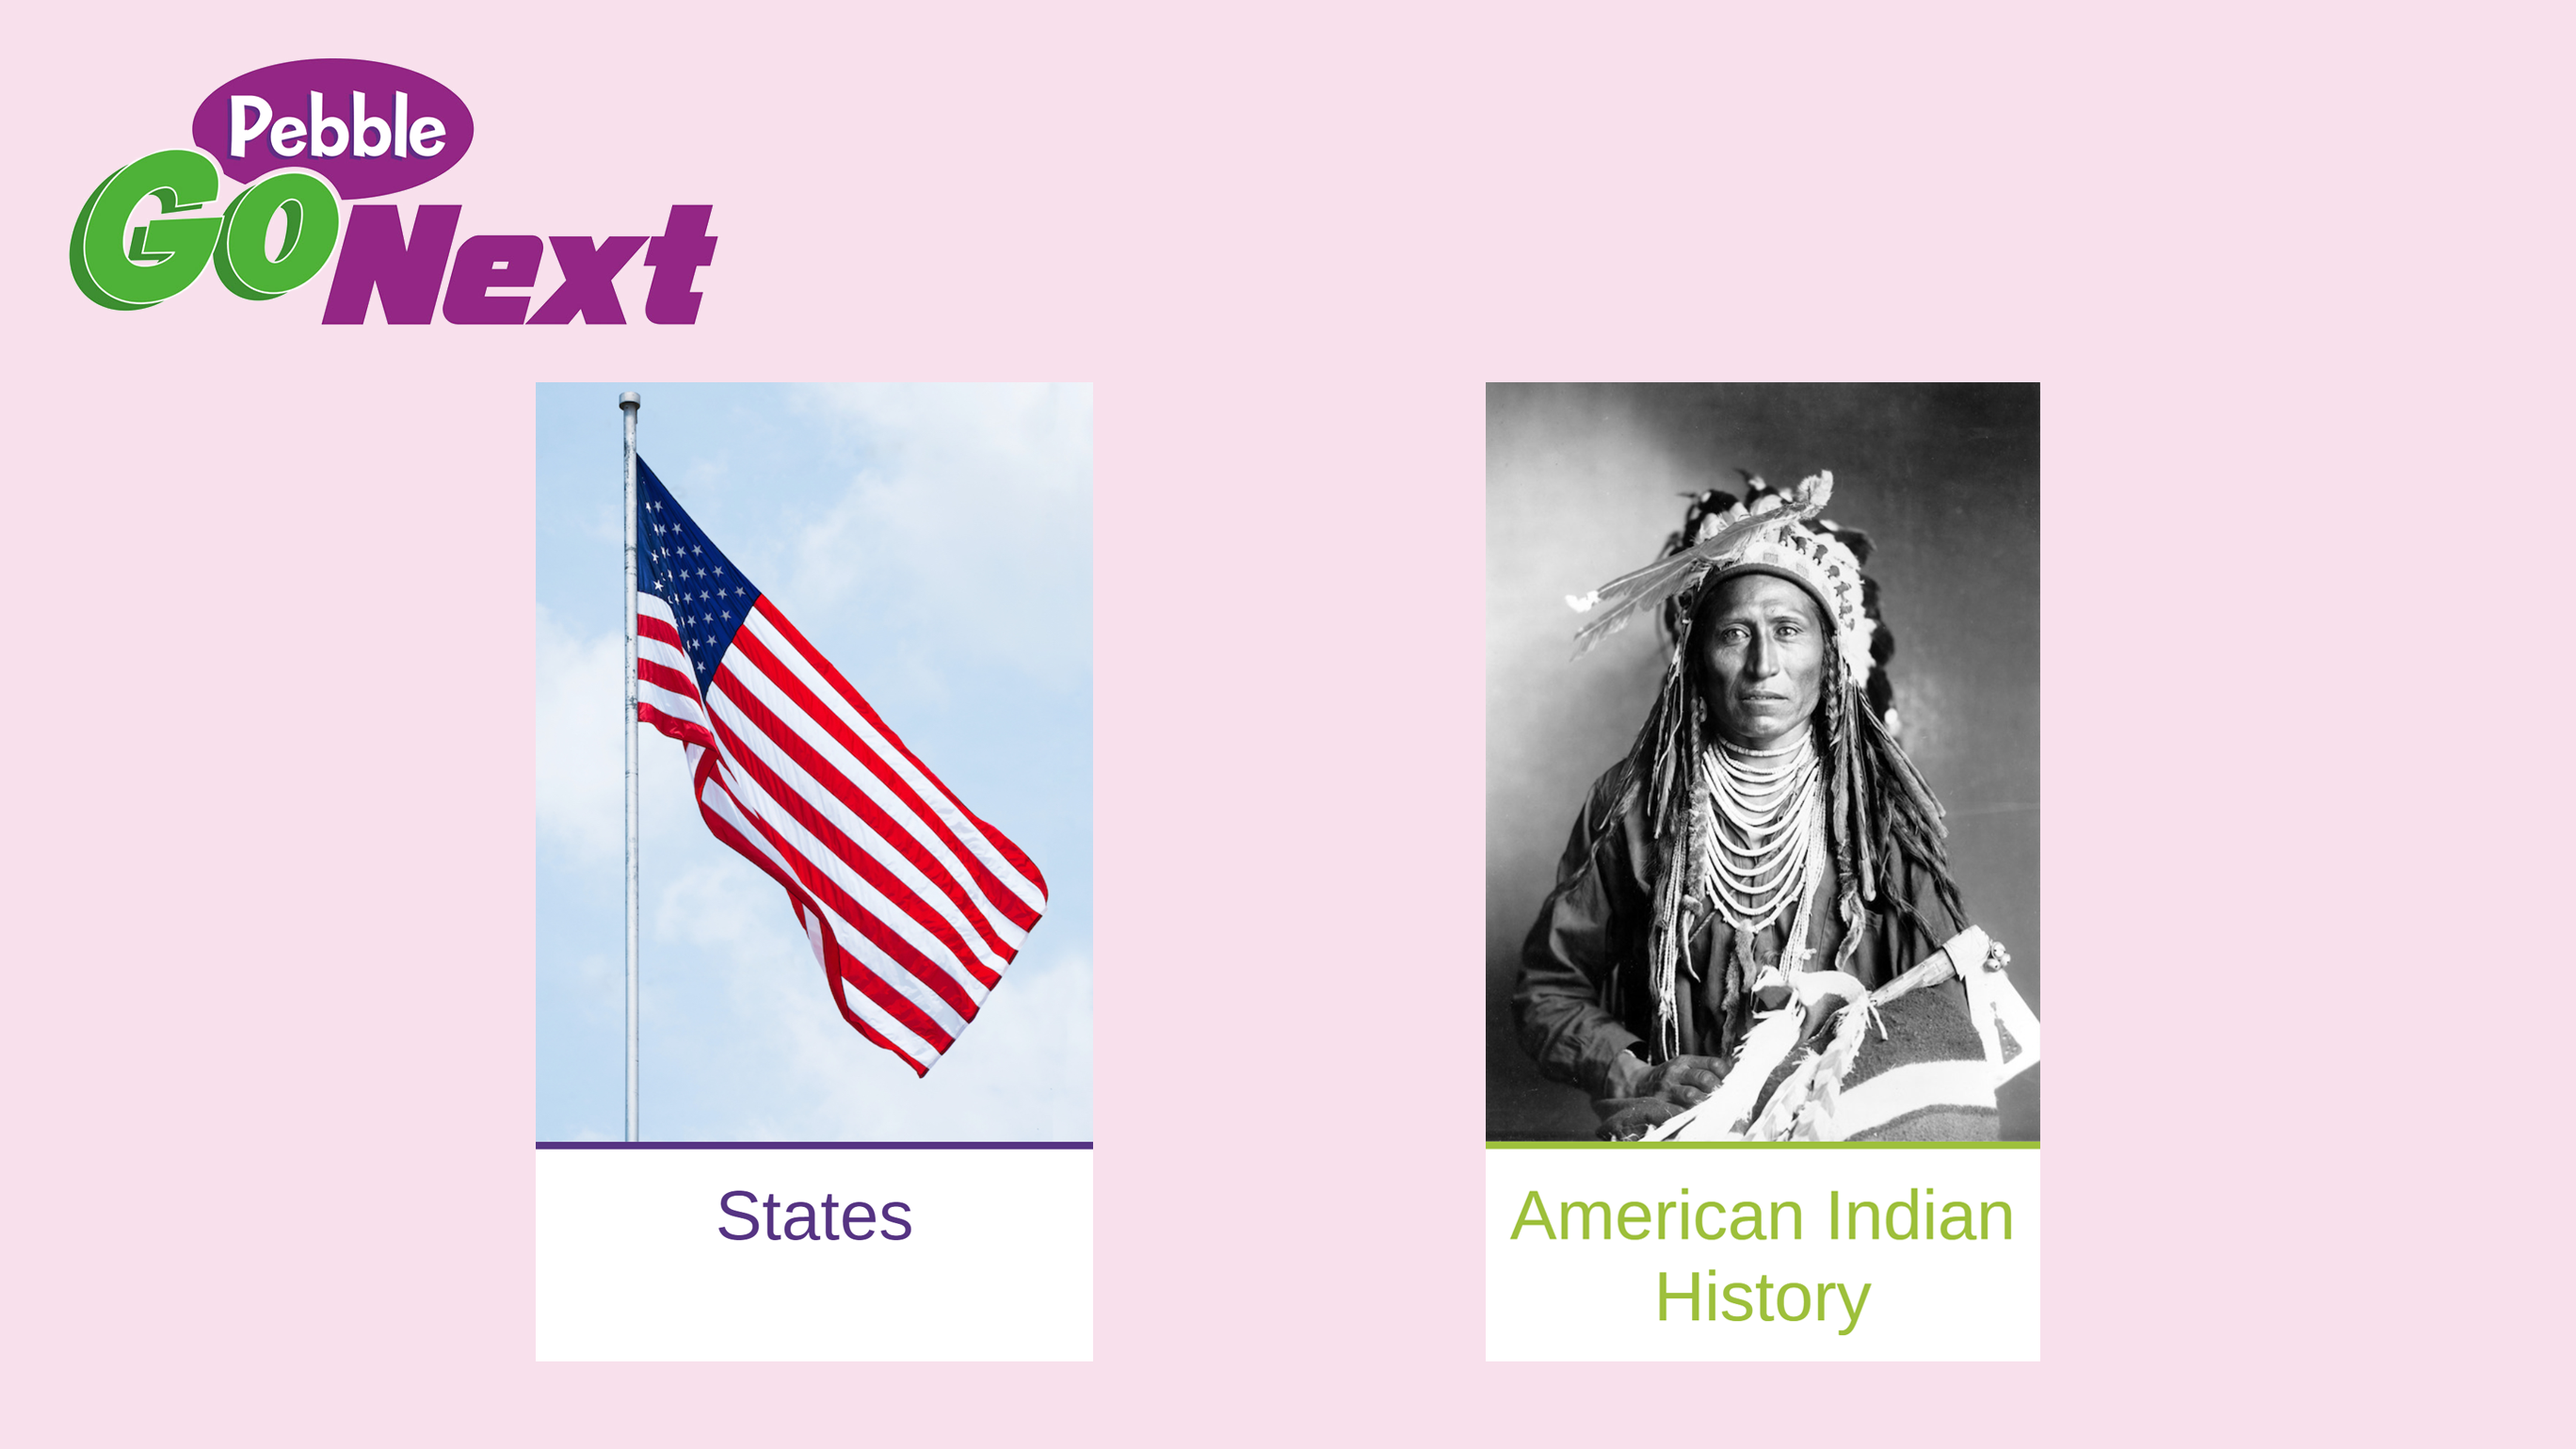 A screencap of Pebble Go Next and its States and Native American Studies sections.